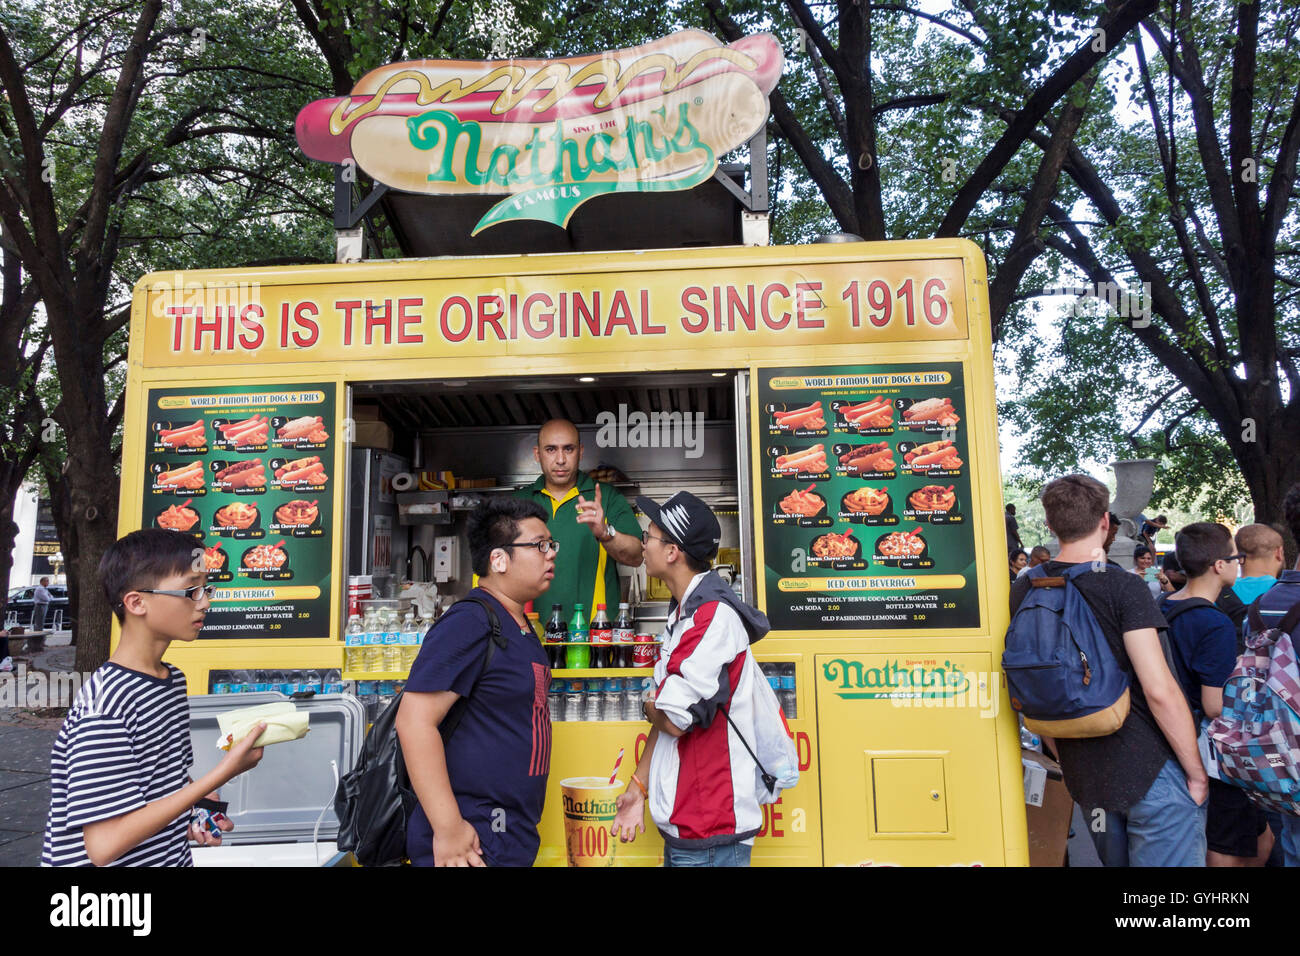 New York City, NY NYC Manhattan, Central Park South, Street Food Vendor, Hot Dogs, Nathan's Famous, Asian Adult, Adults, man men Male, boy boys Kids children Stockfoto